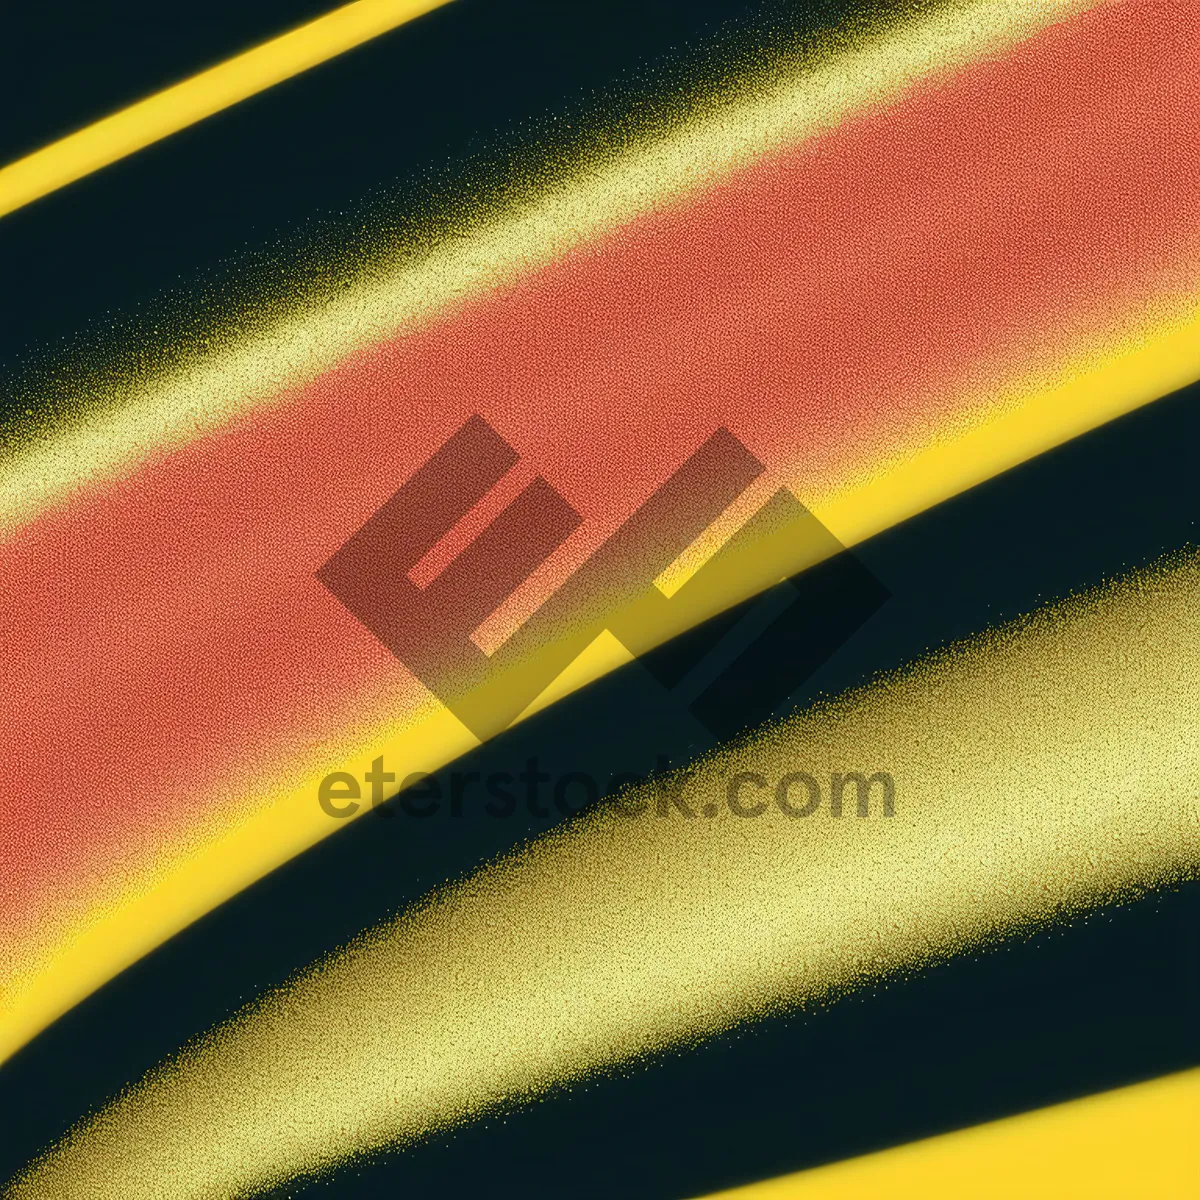 Picture of Golden Lines: Artistic Graphic Design with Textured Yellow Backdrop